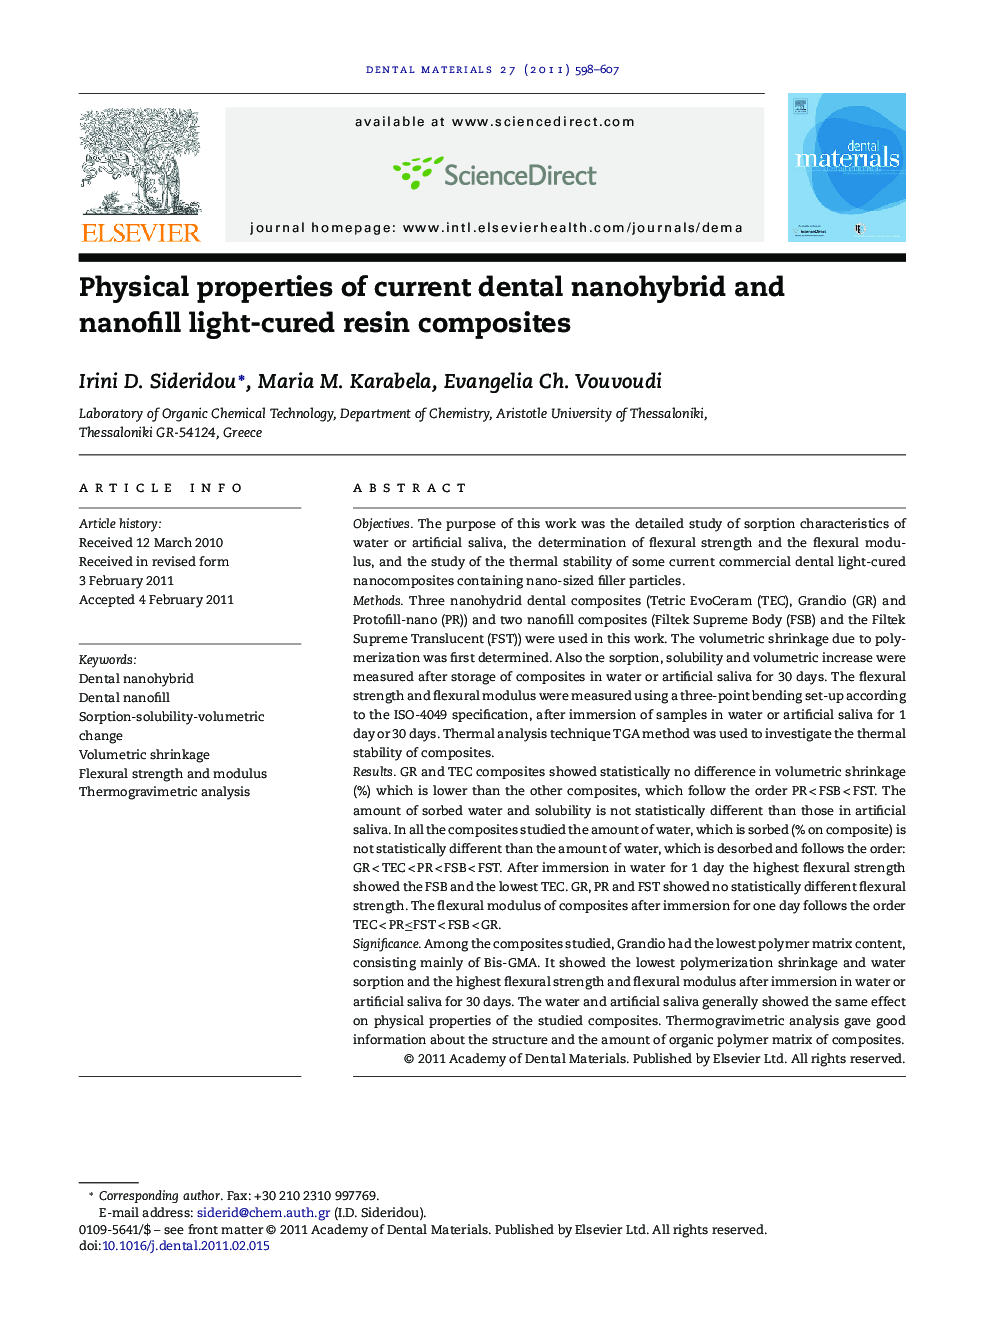 Physical properties of current dental nanohybrid and nanofill light-cured resin composites